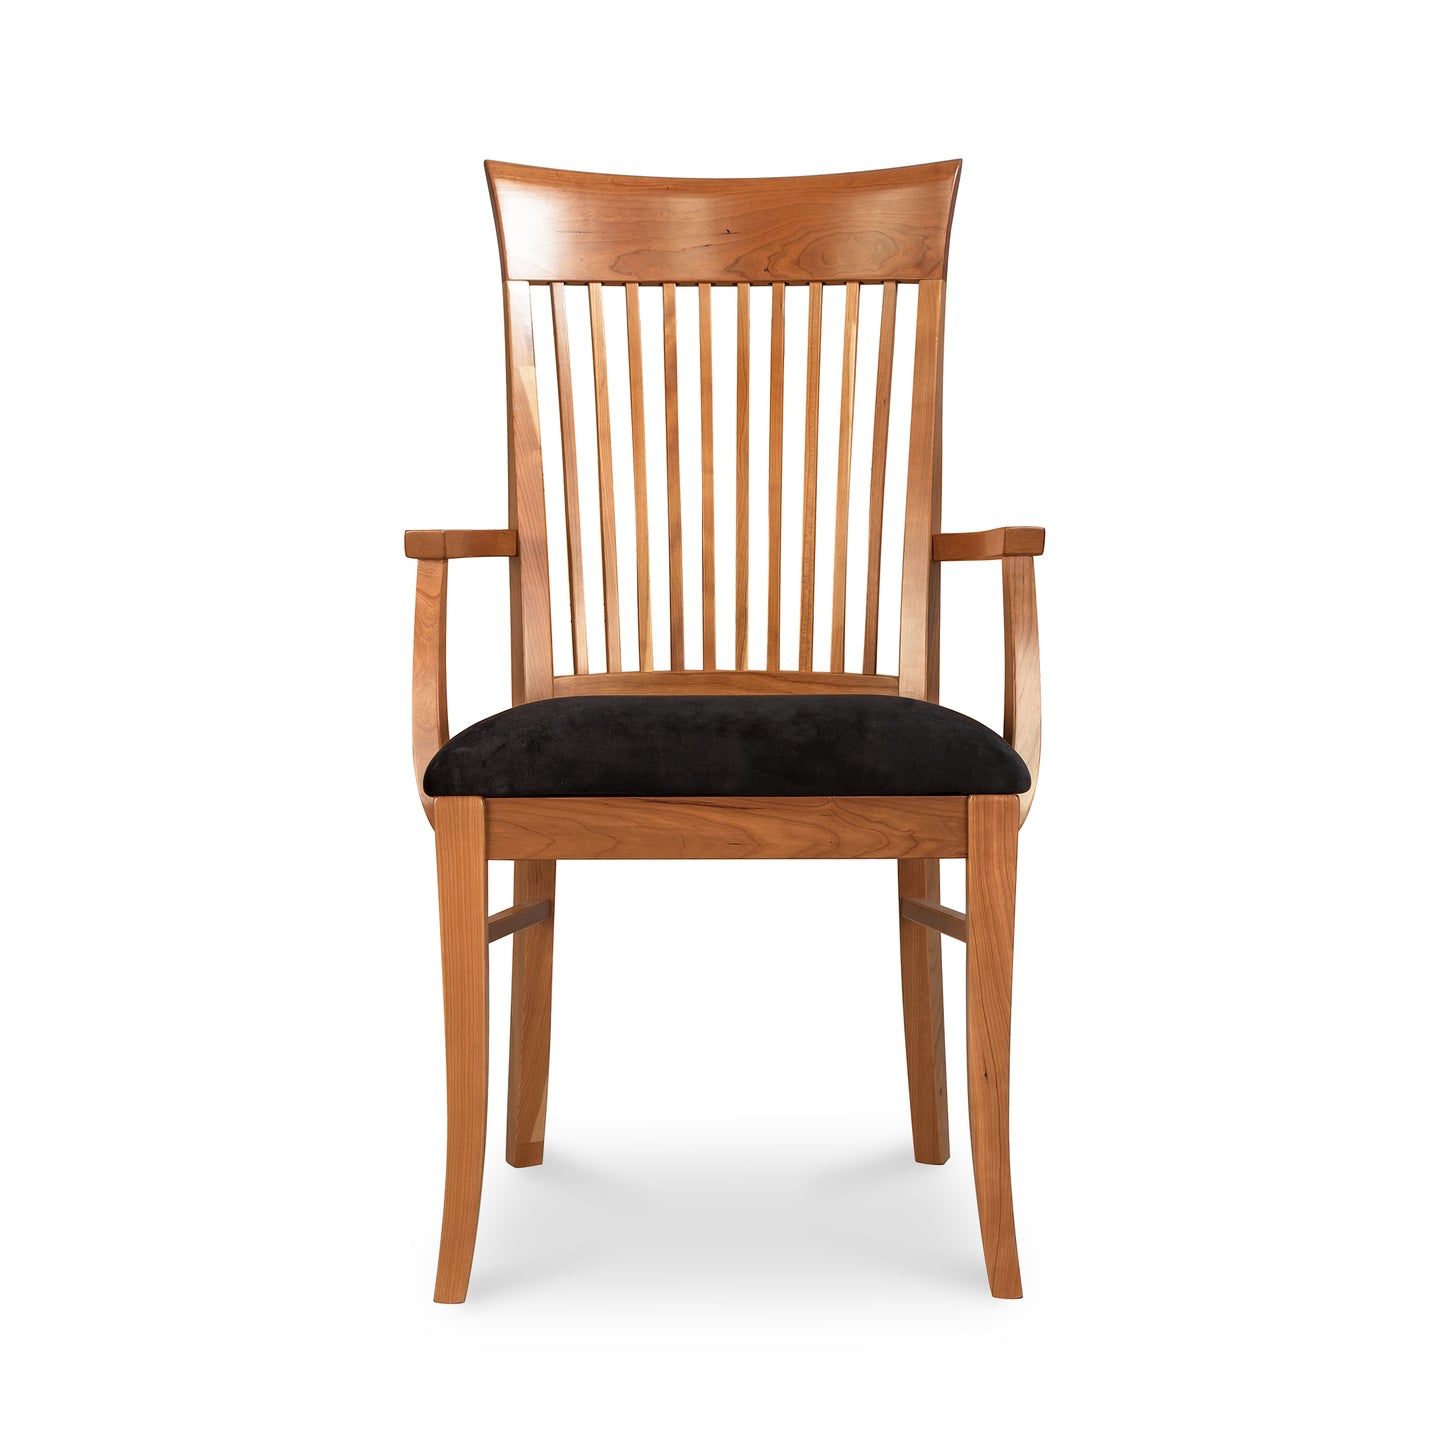 A natural cherry Vermont Woods Studios Contemporary Shaker Chair with vertical slats on the backrest and black upholstered seat cushion, isolated against a white background.